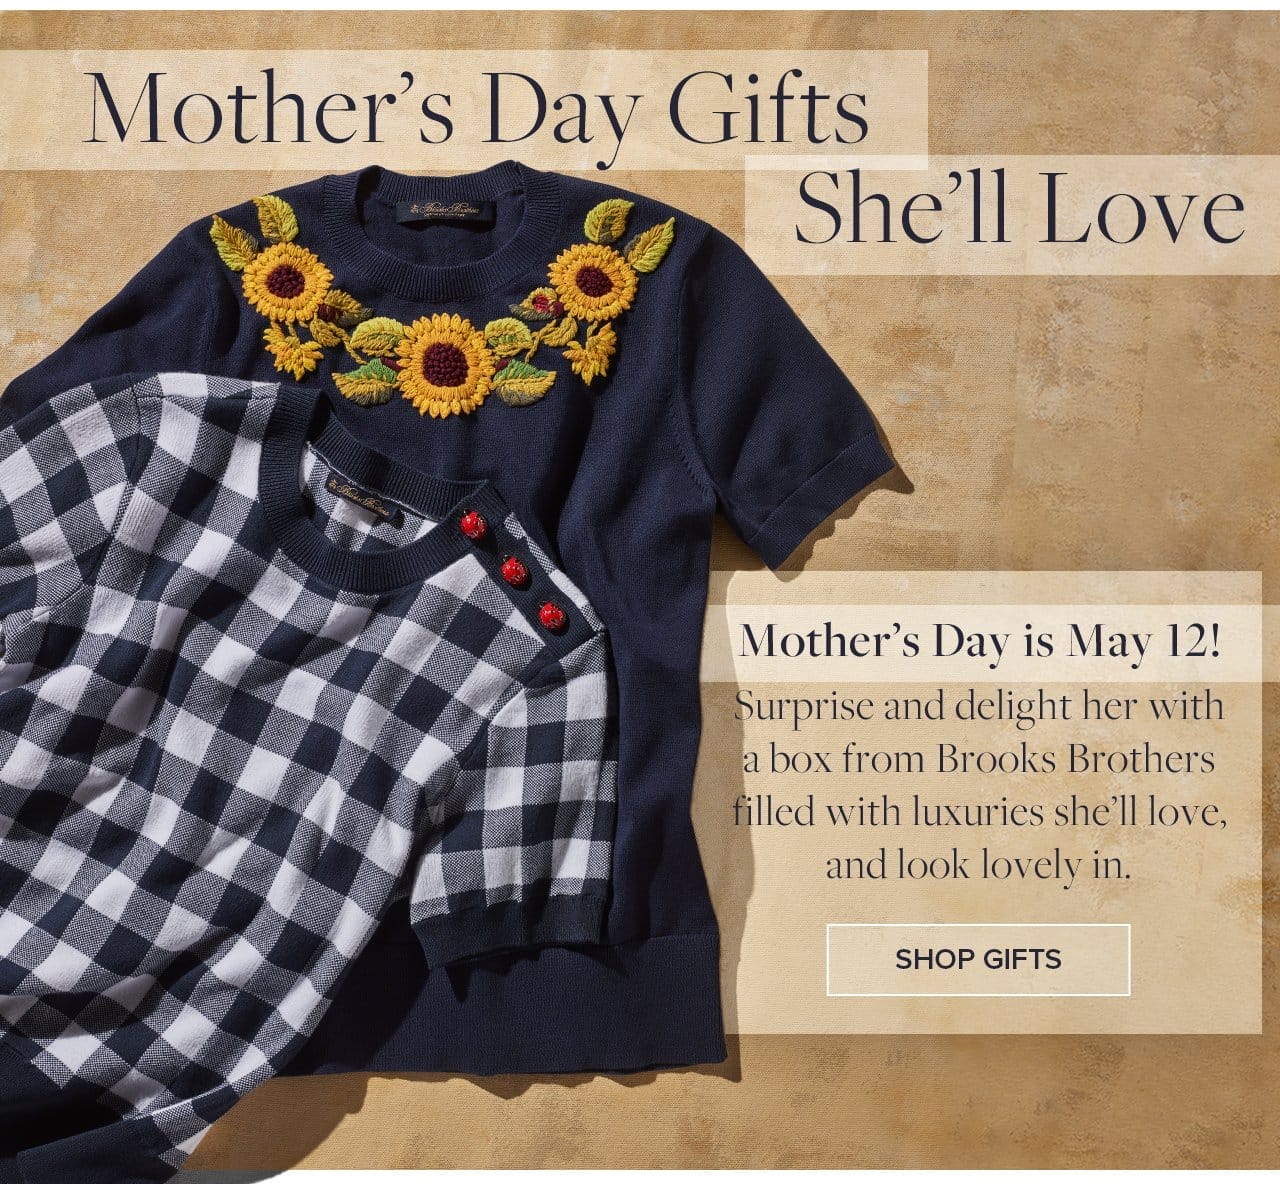 Mother's Day Gifts She'll Love. Mother's Day is May 12! Surprise and delight her with a box from Brooks Brothers filled with luxuries she'll love, and look lovely in. Shop Gifts